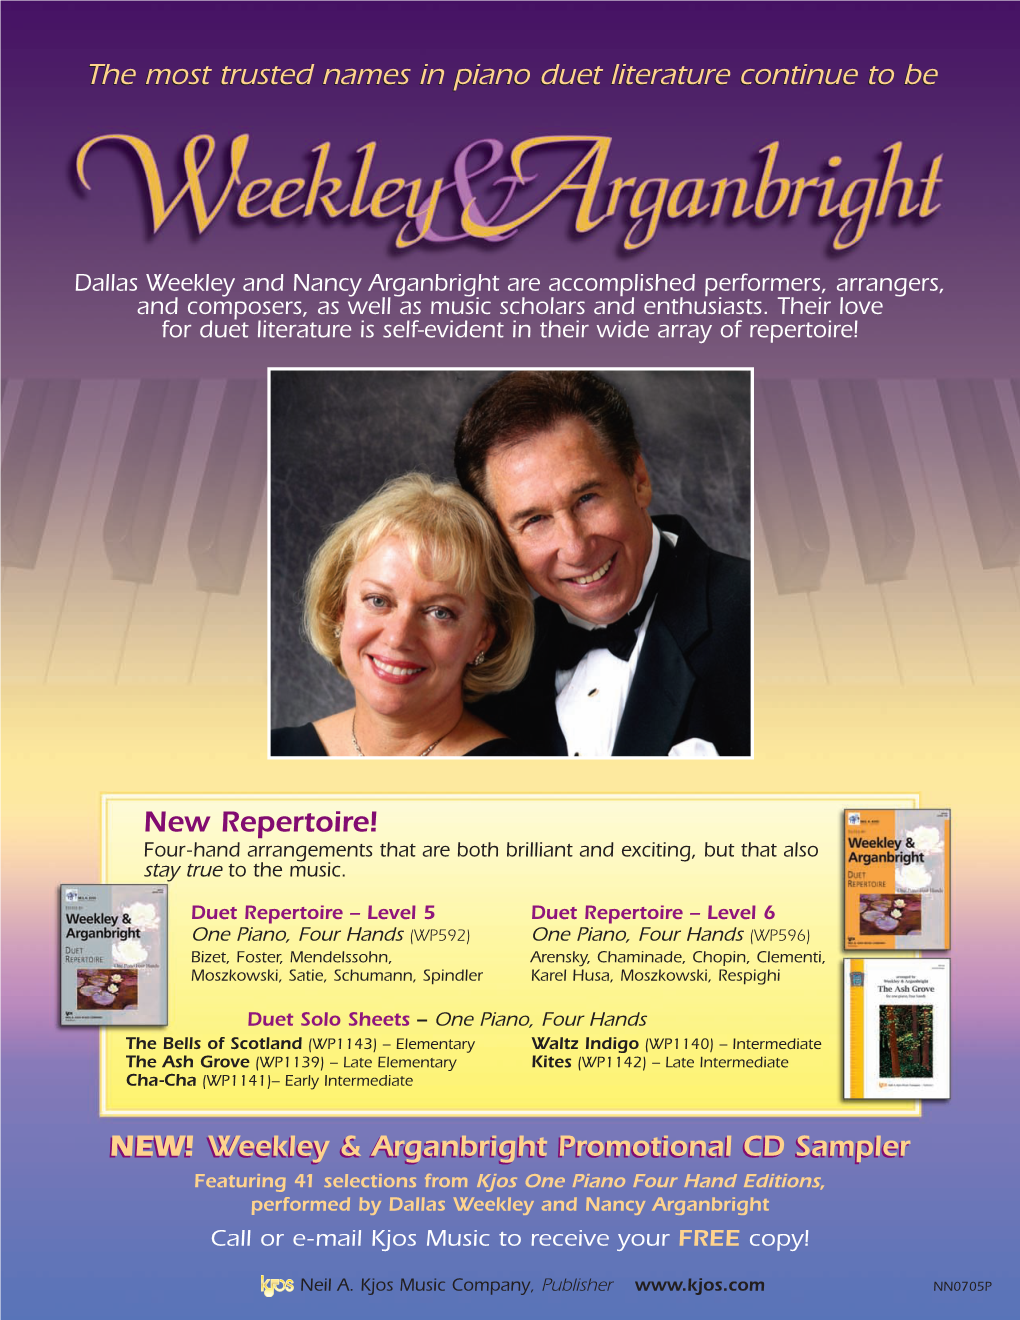 Weekley & Arganbright Promotional CD Sampler the Most Trusted